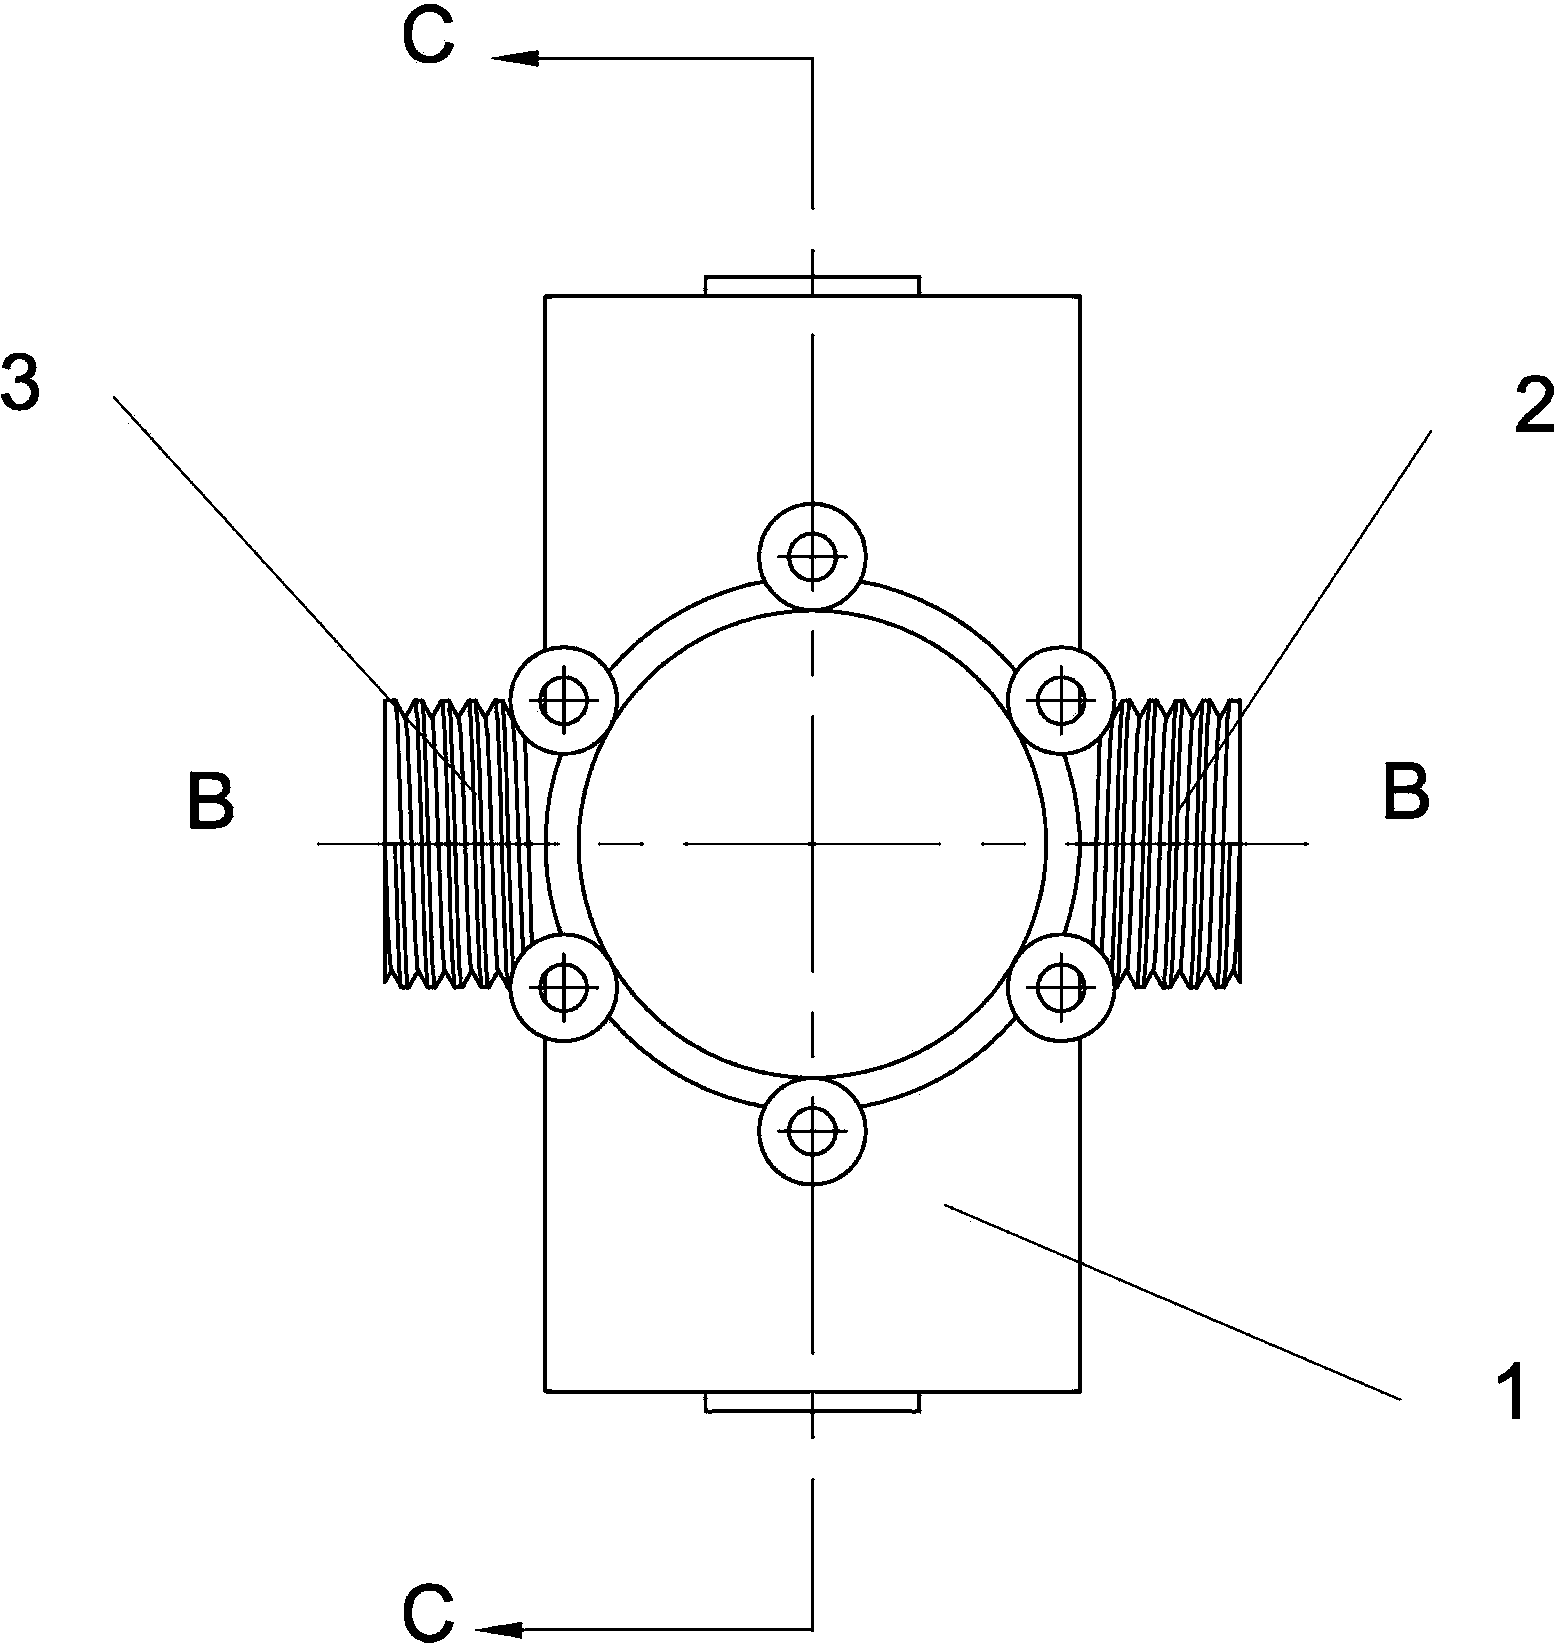 Valve core structure of water heater